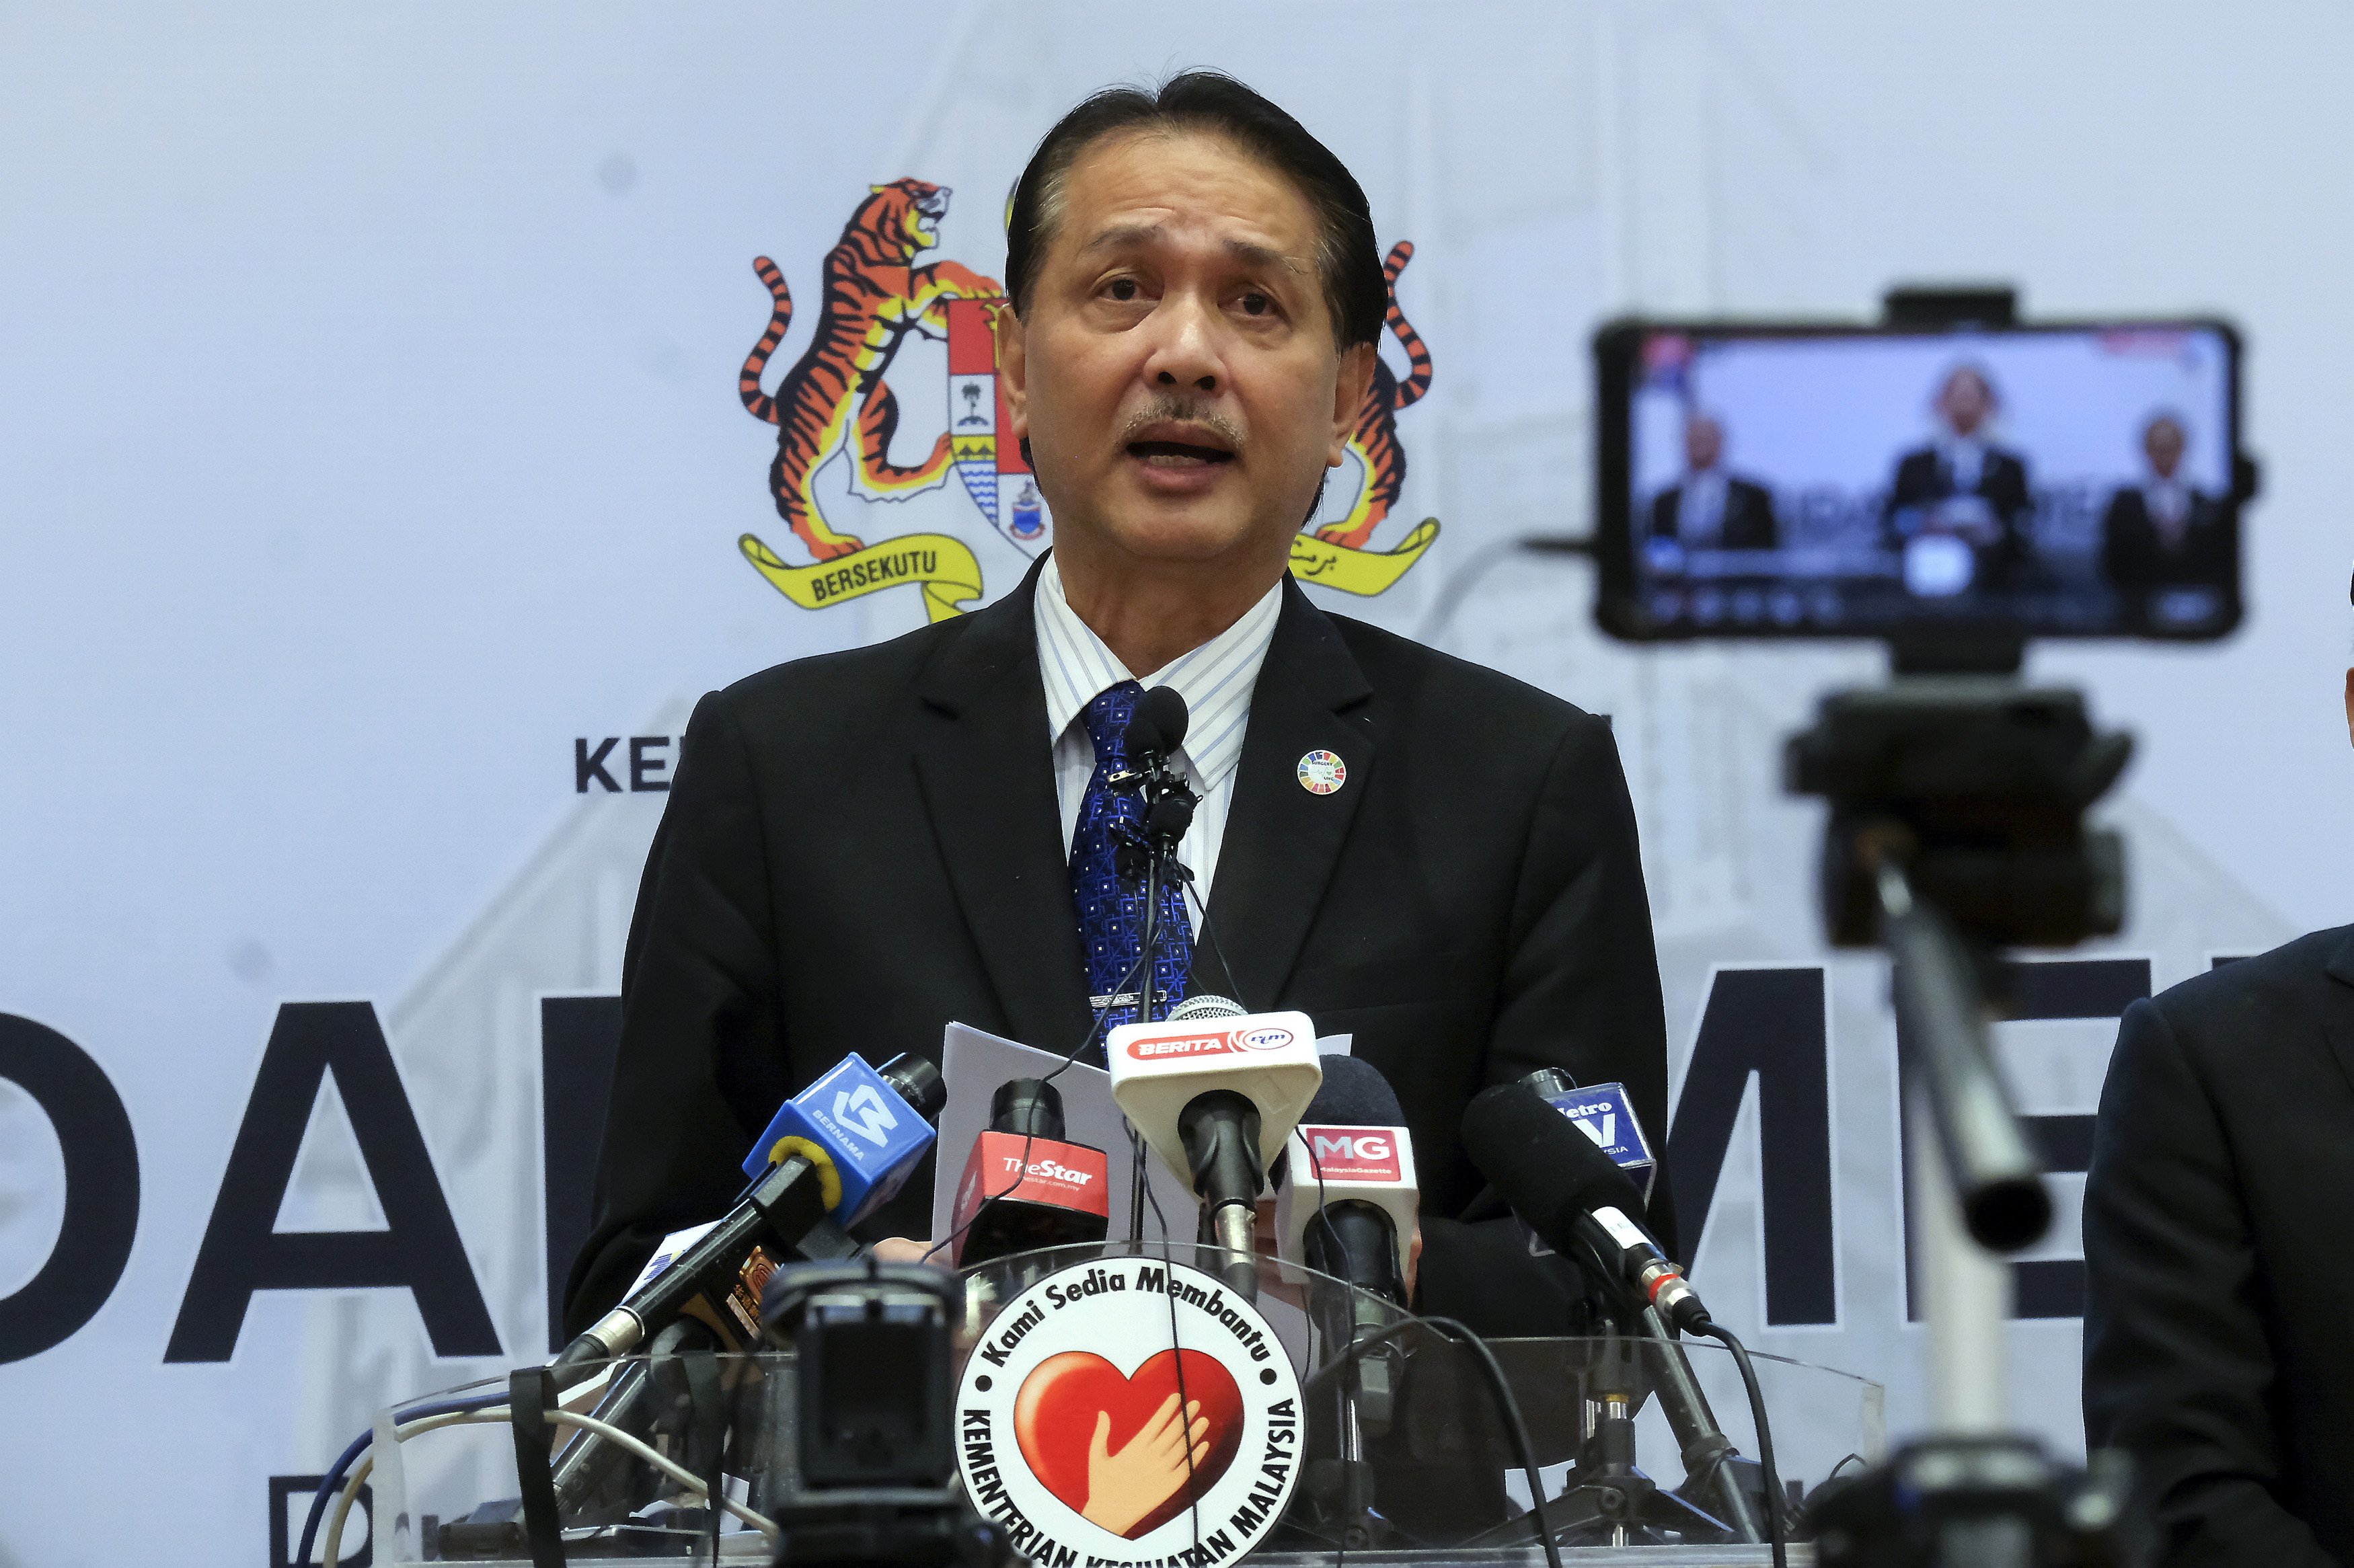 M’sia, S’pore must smoothen SOPs before cross-border travel resumes – Health DG